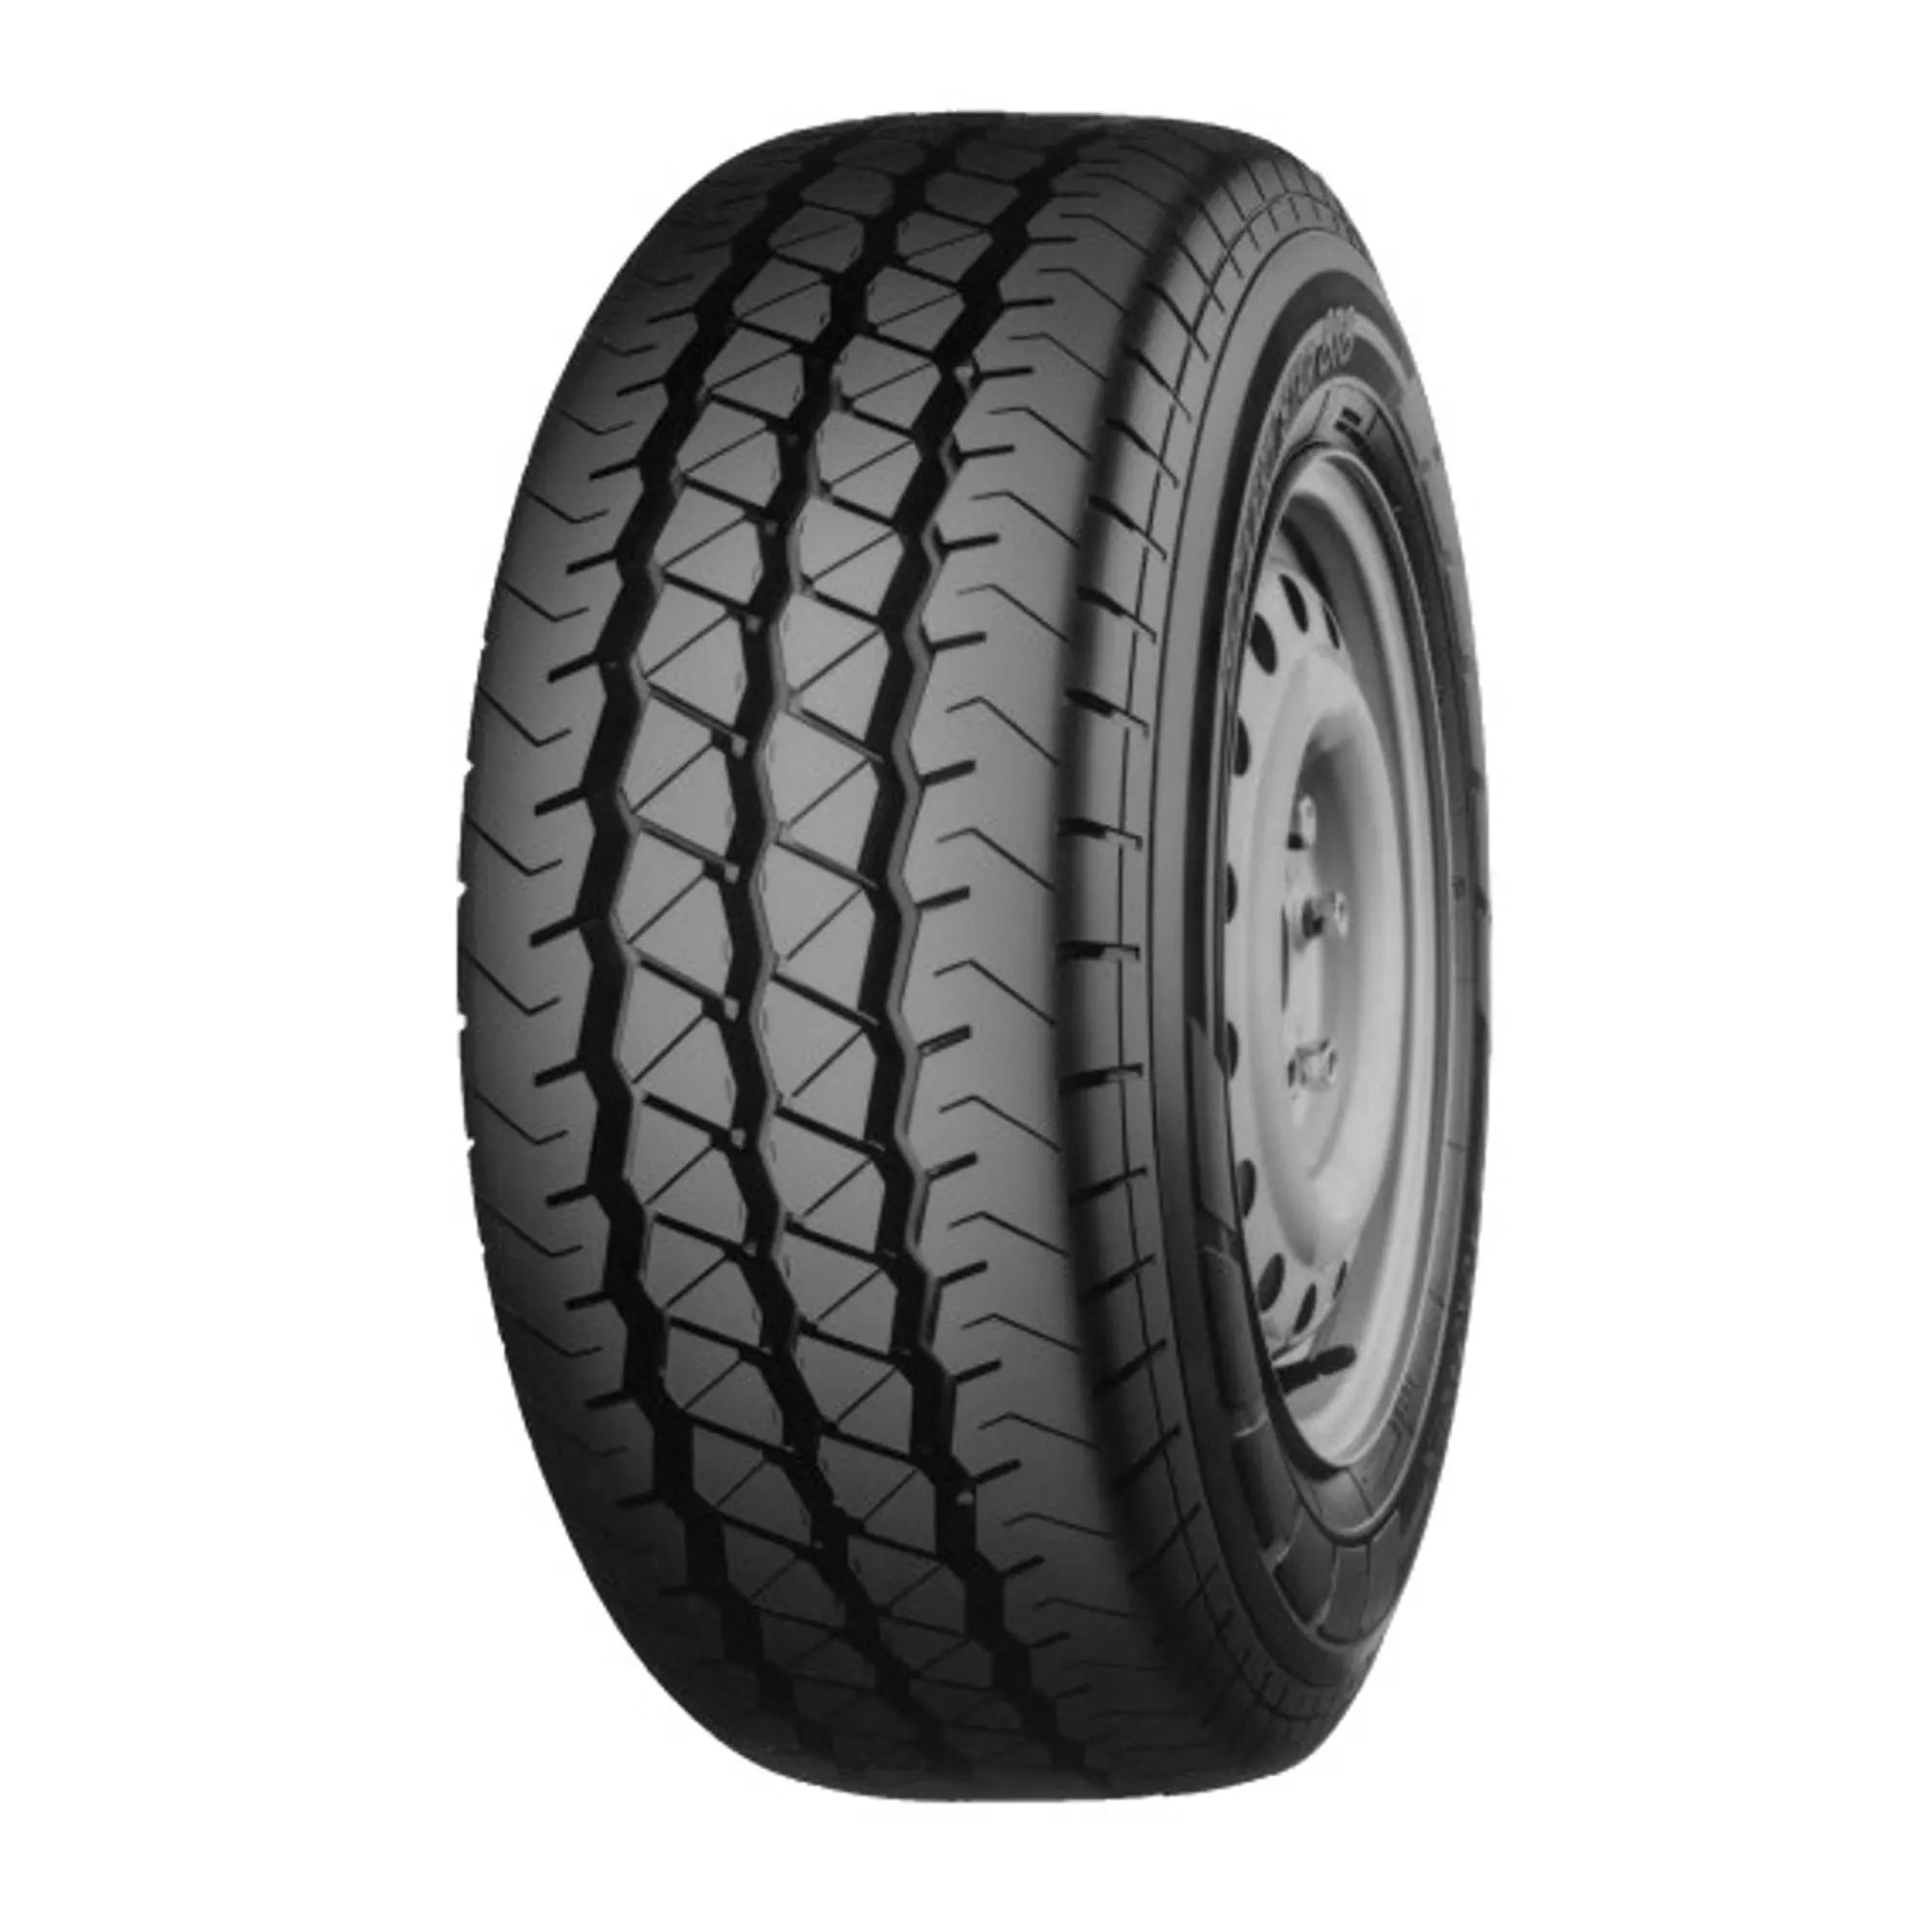 Шина 225/65R16C 112/110R Delivery Star RY818